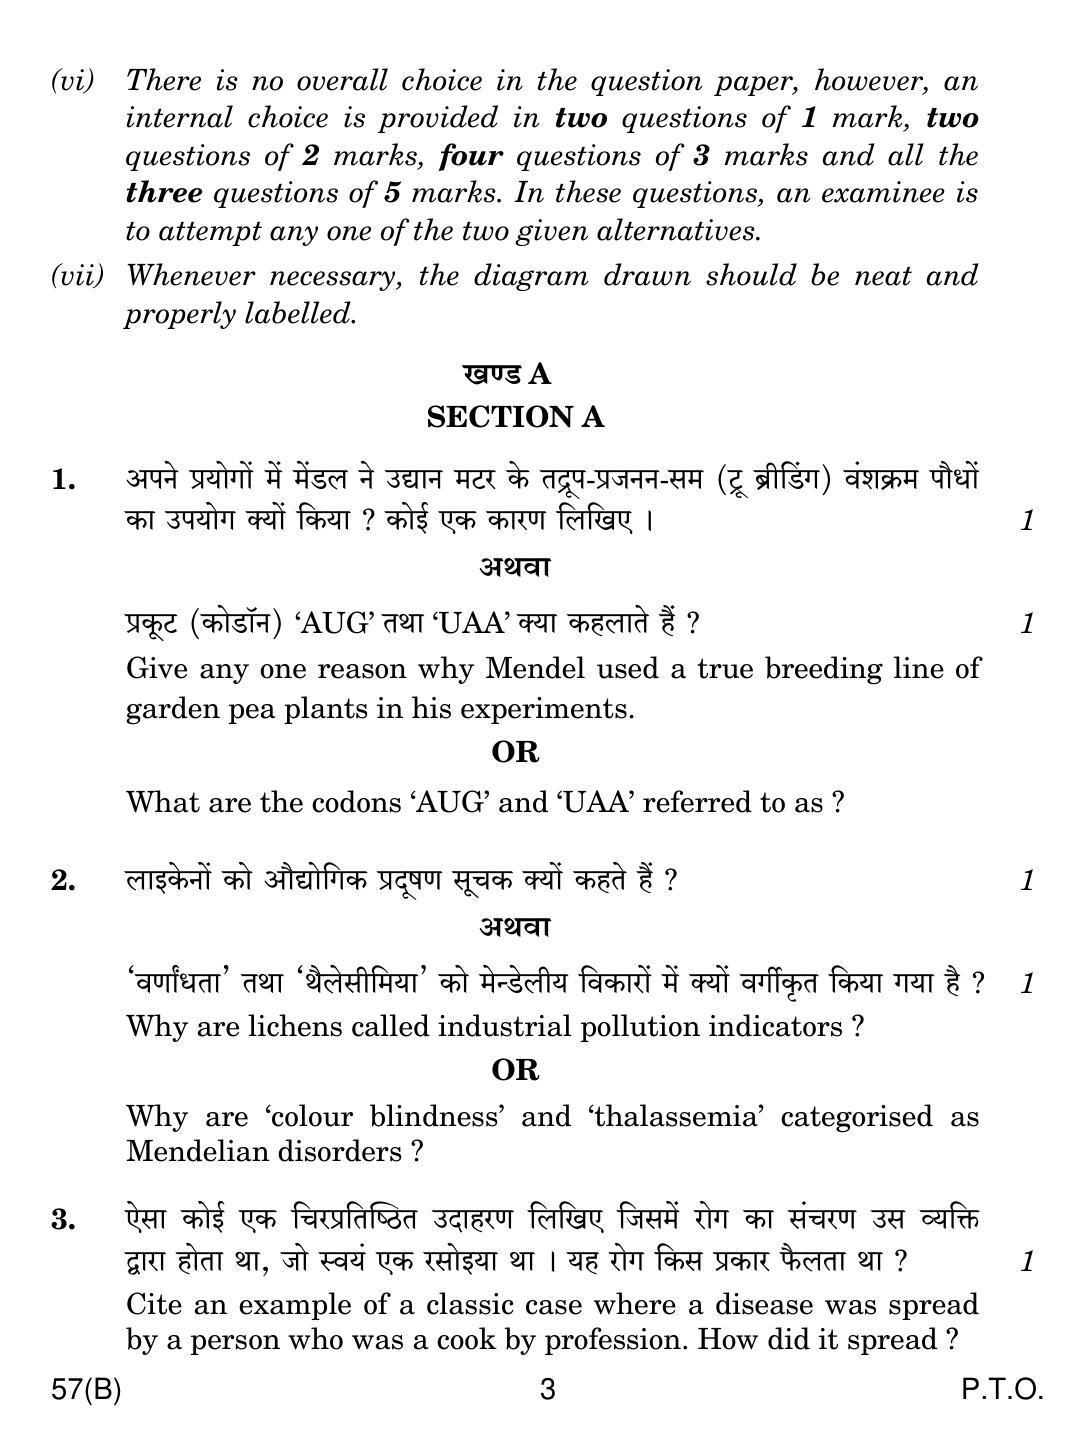 CBSE Class 12 57(B) Biology For Blind 2019 Question Paper - Page 3